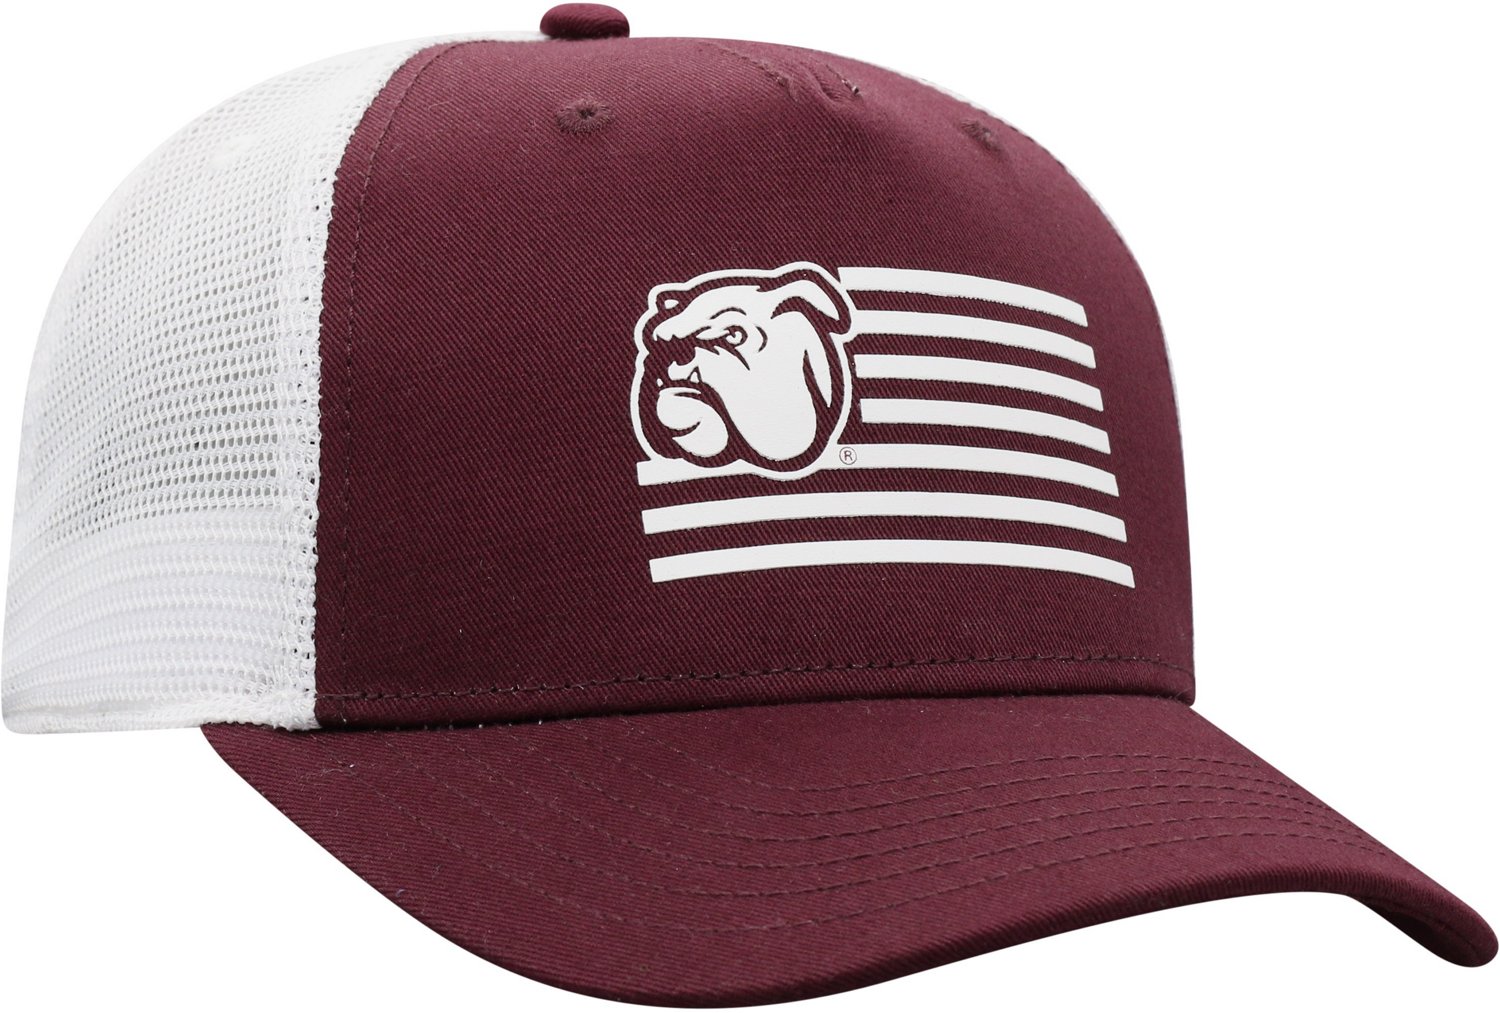 Wincraft Mississippi State Bulldogs Hard Hat 2419791 